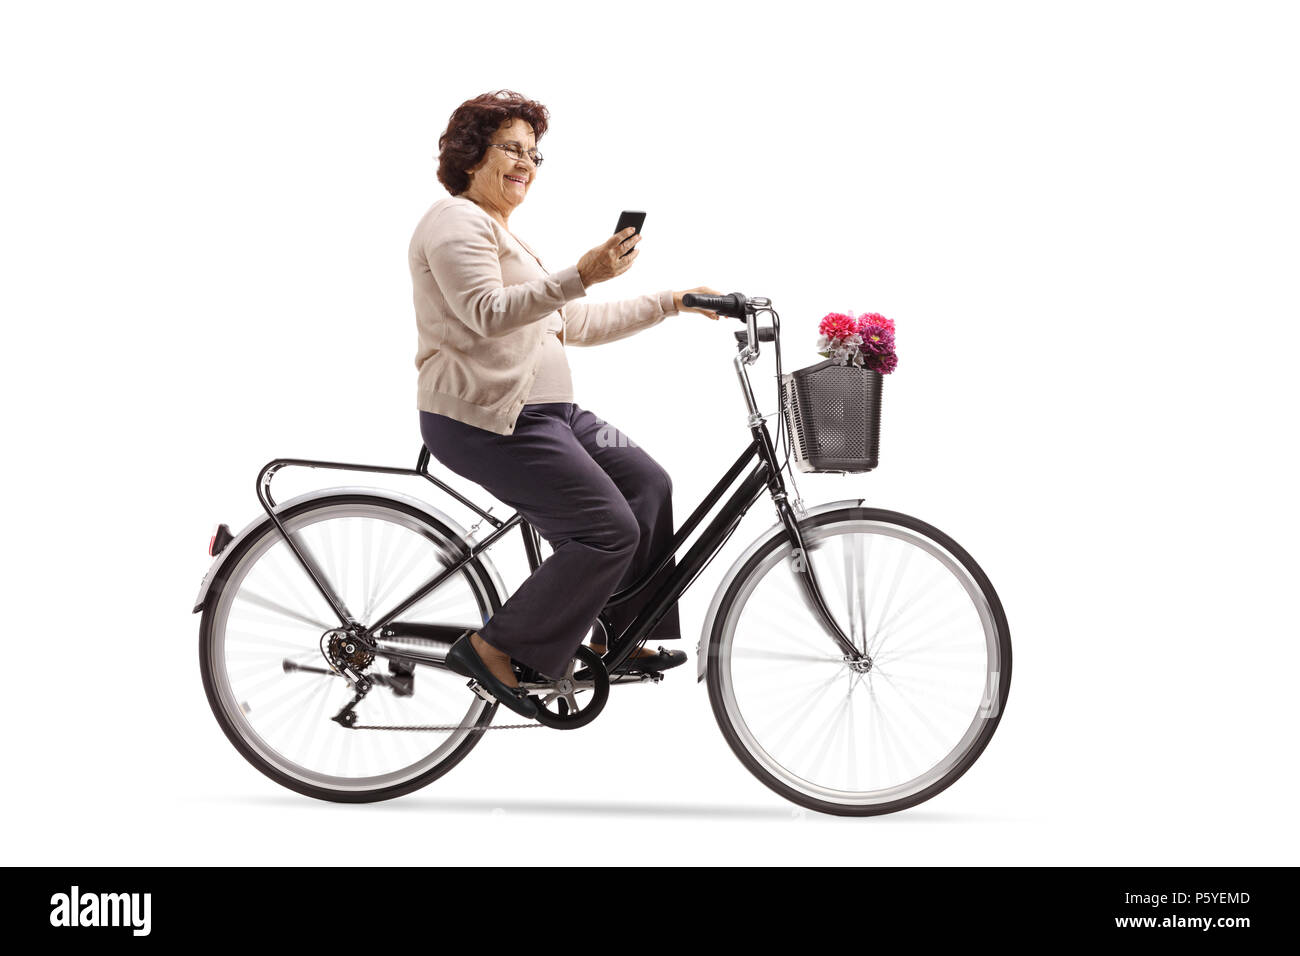 Elderly woman riding a bicycle and looking at her phone isolated on white background Stock Photo